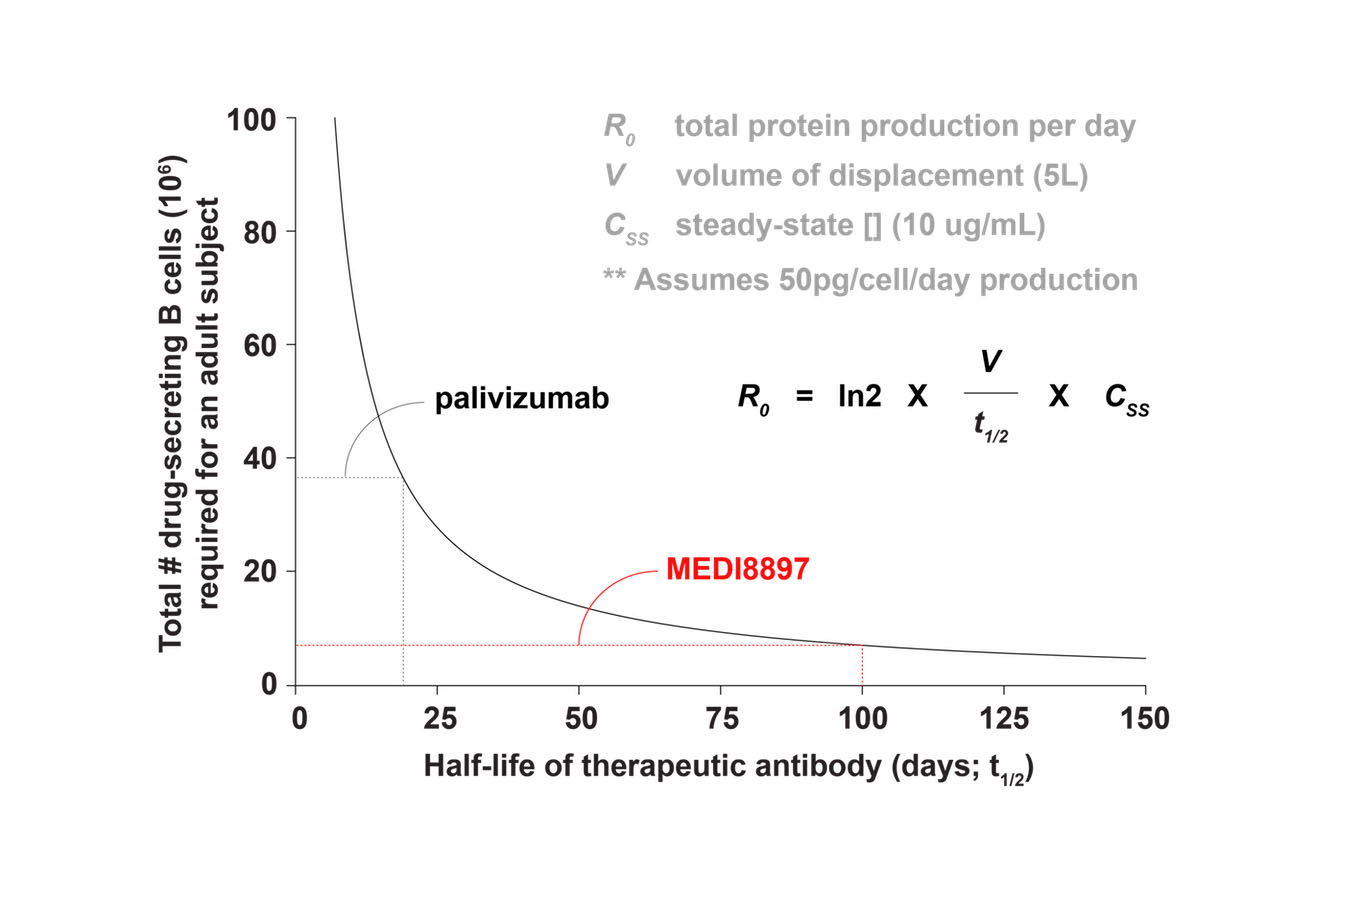 Graph showing half-life of therapeutic antibody